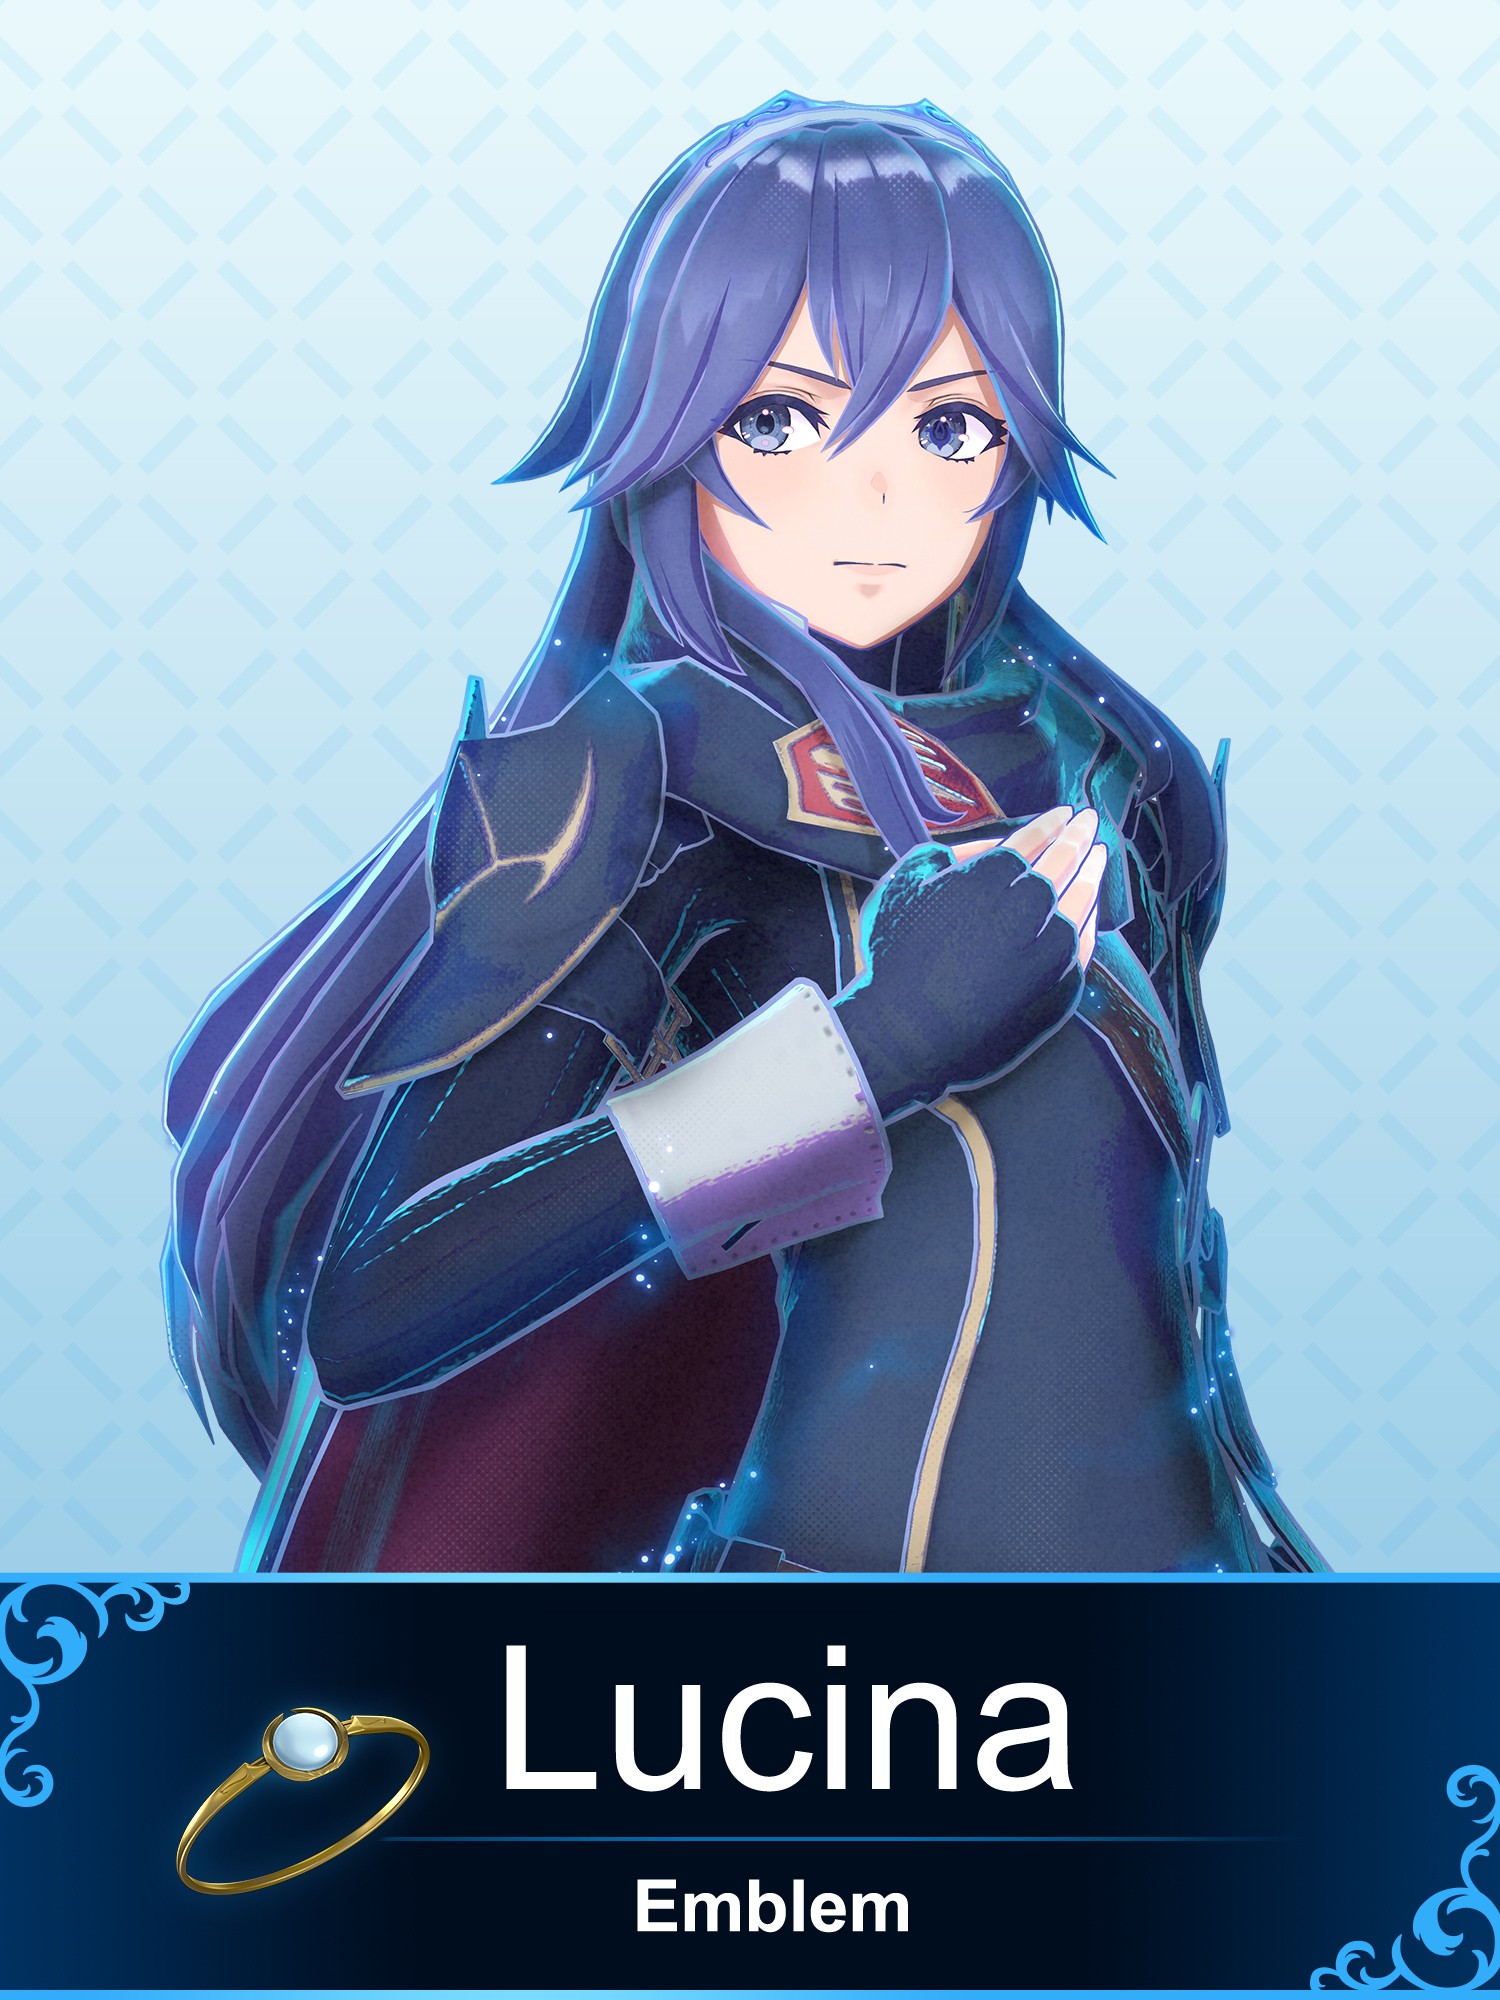 How to Get Emblem Lucina: Engage Skills, Abilities, and Engage Weapon